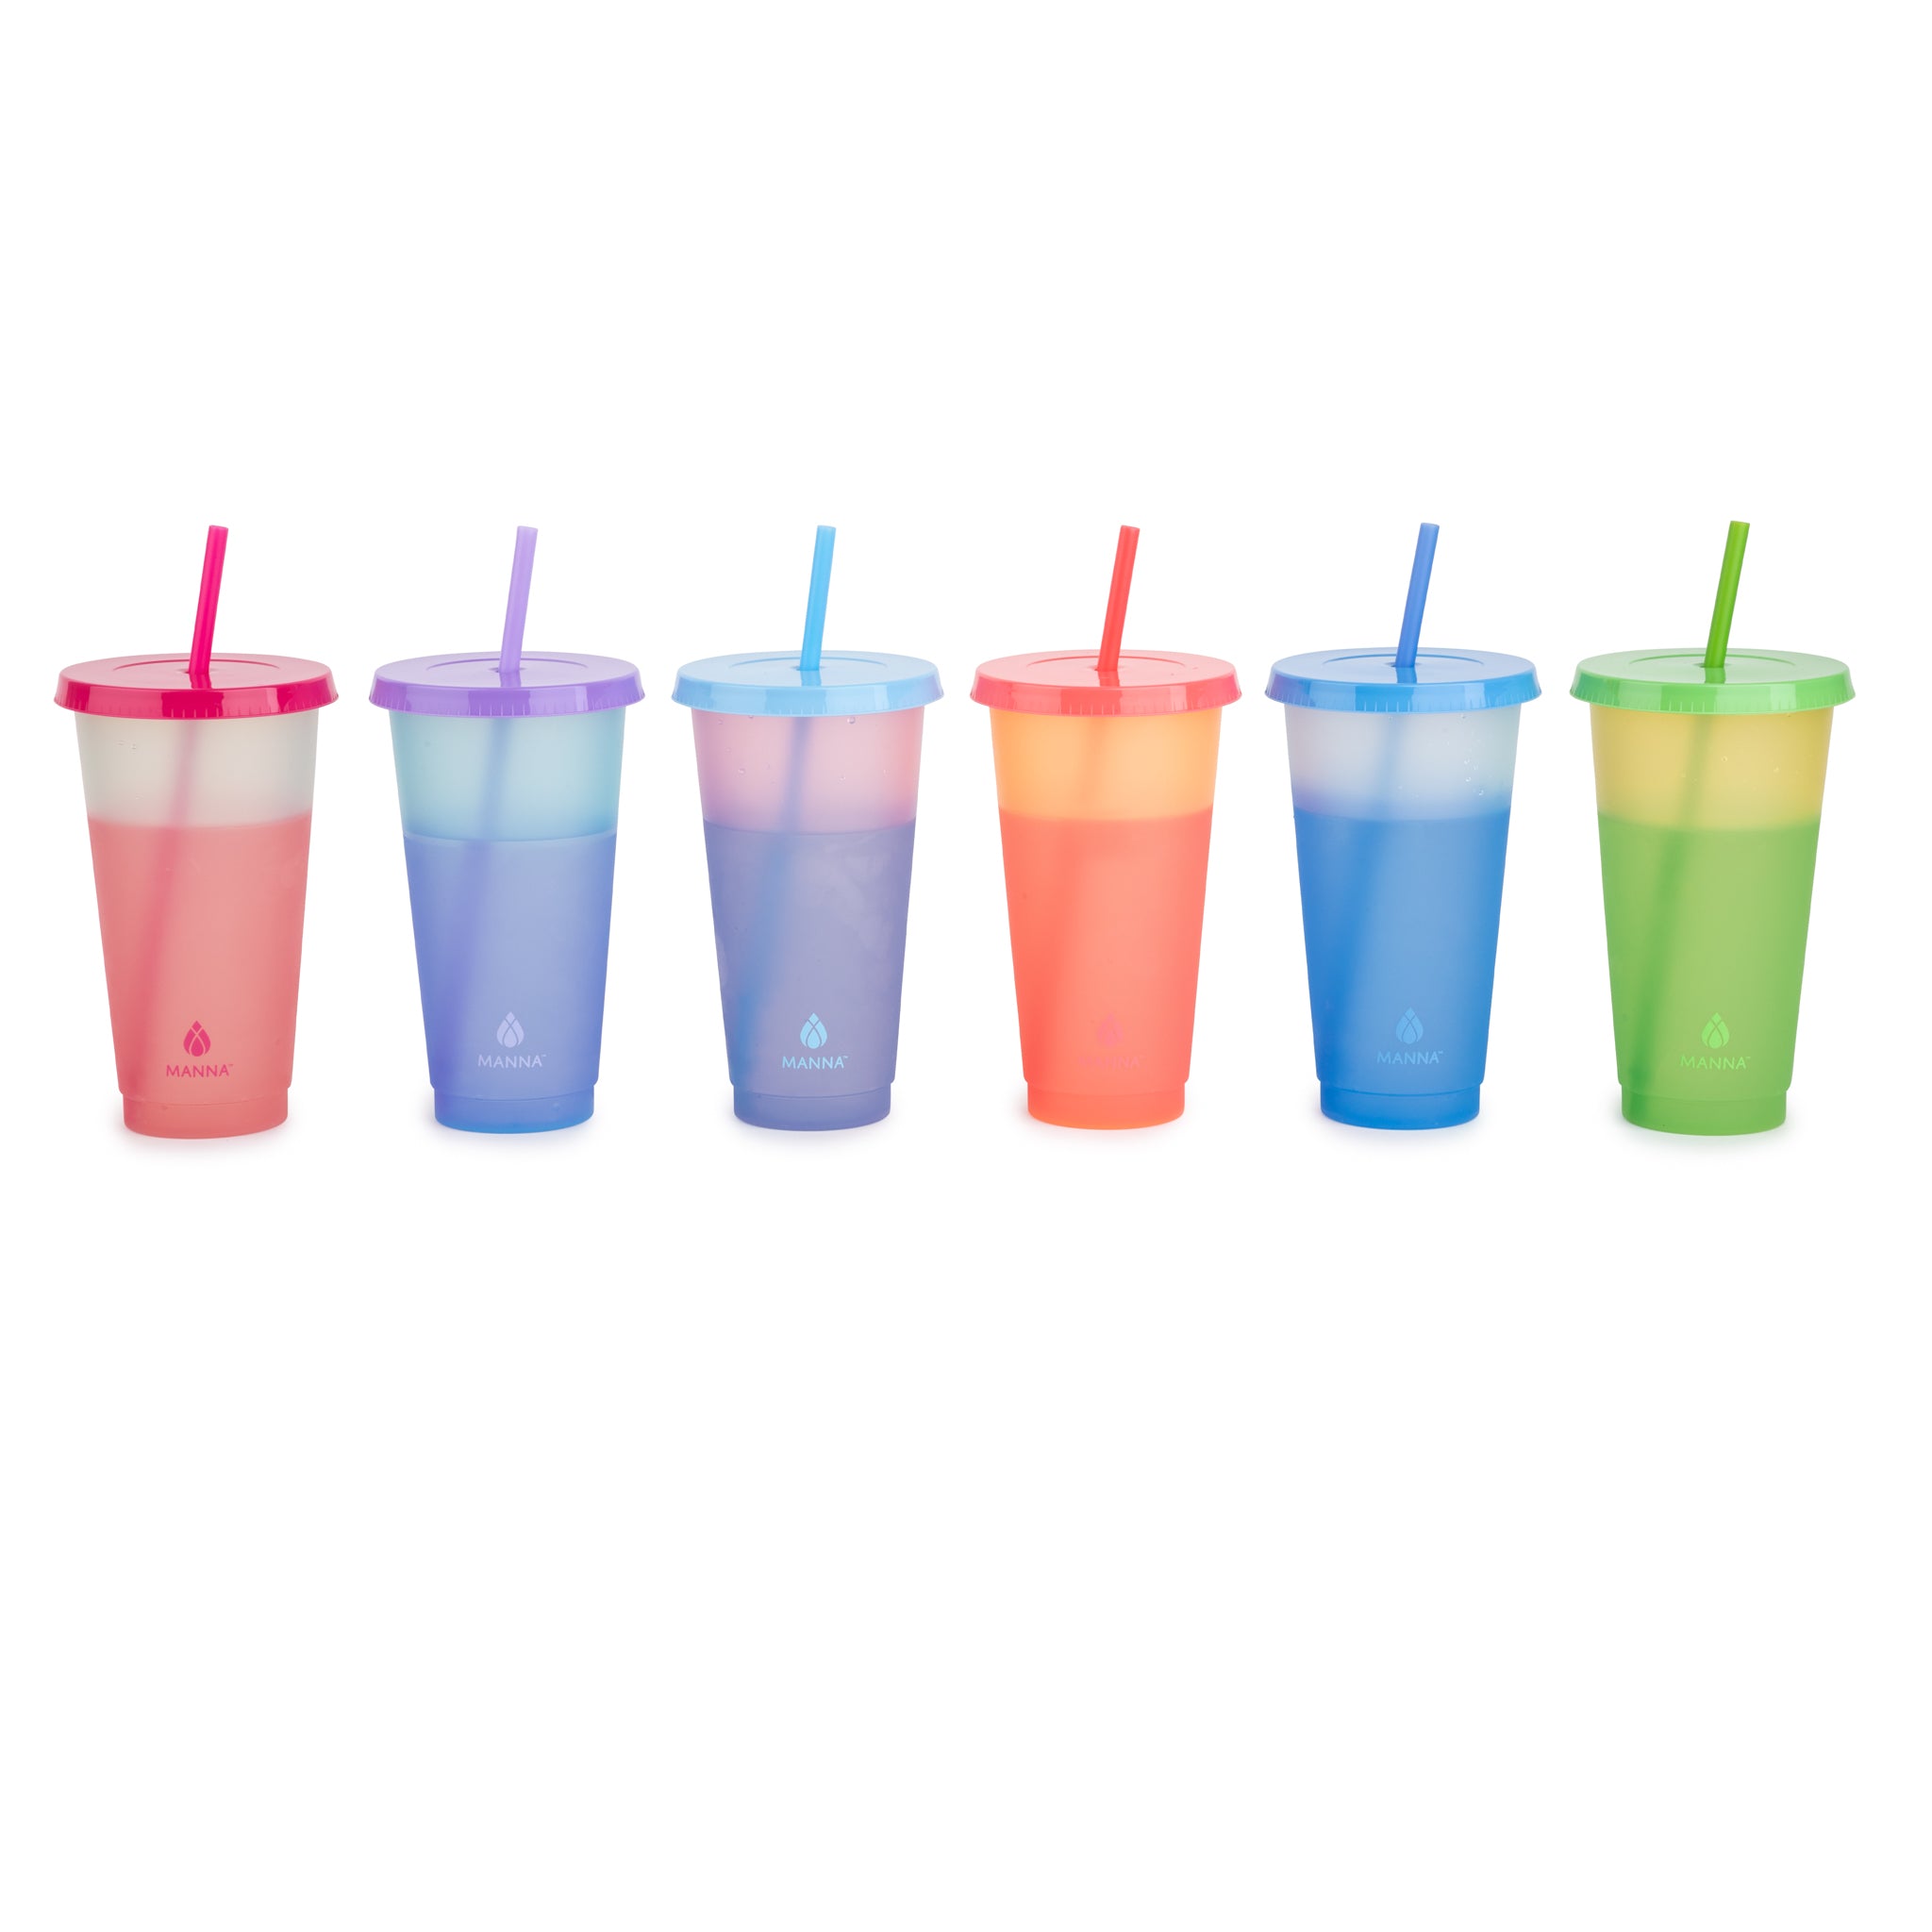 24-Piece Summer Color-Changing Cup Set – Manna Hydration